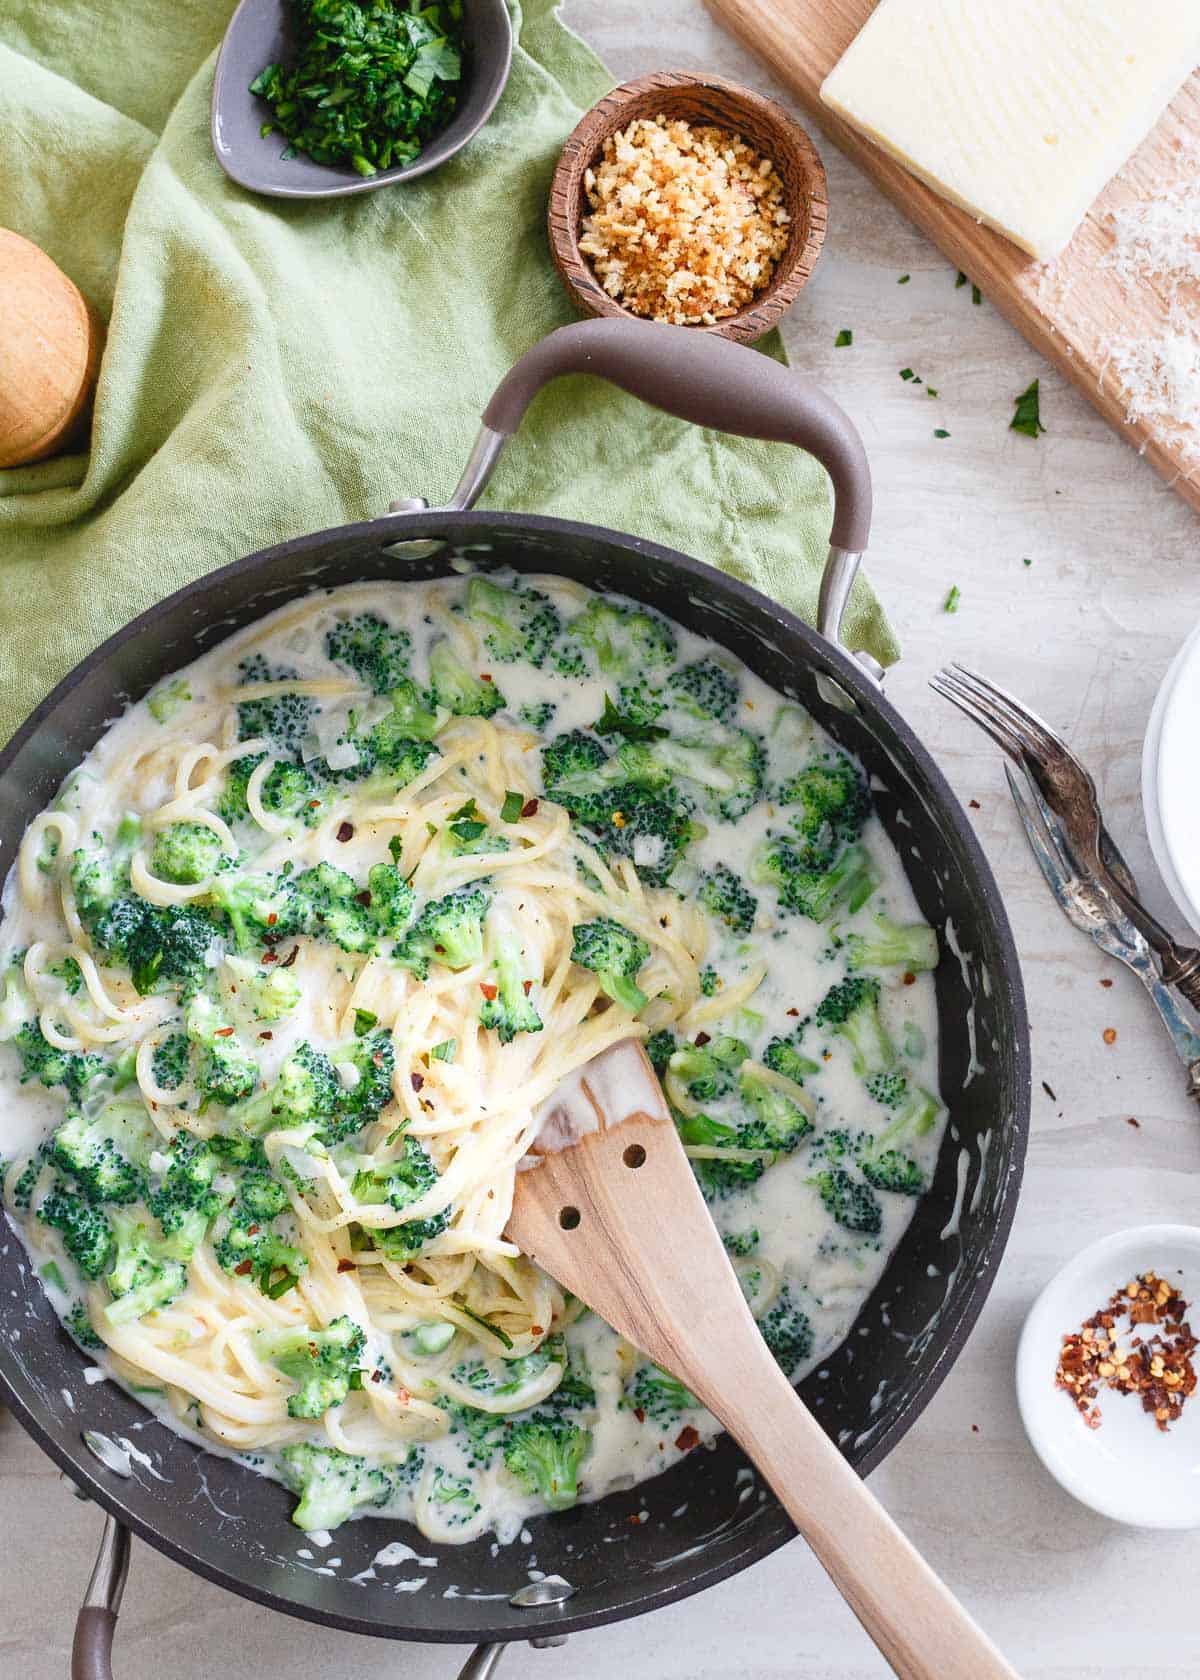 This healthier take on spaghetti alfredo is filled with broccoli and won't bust your diet.